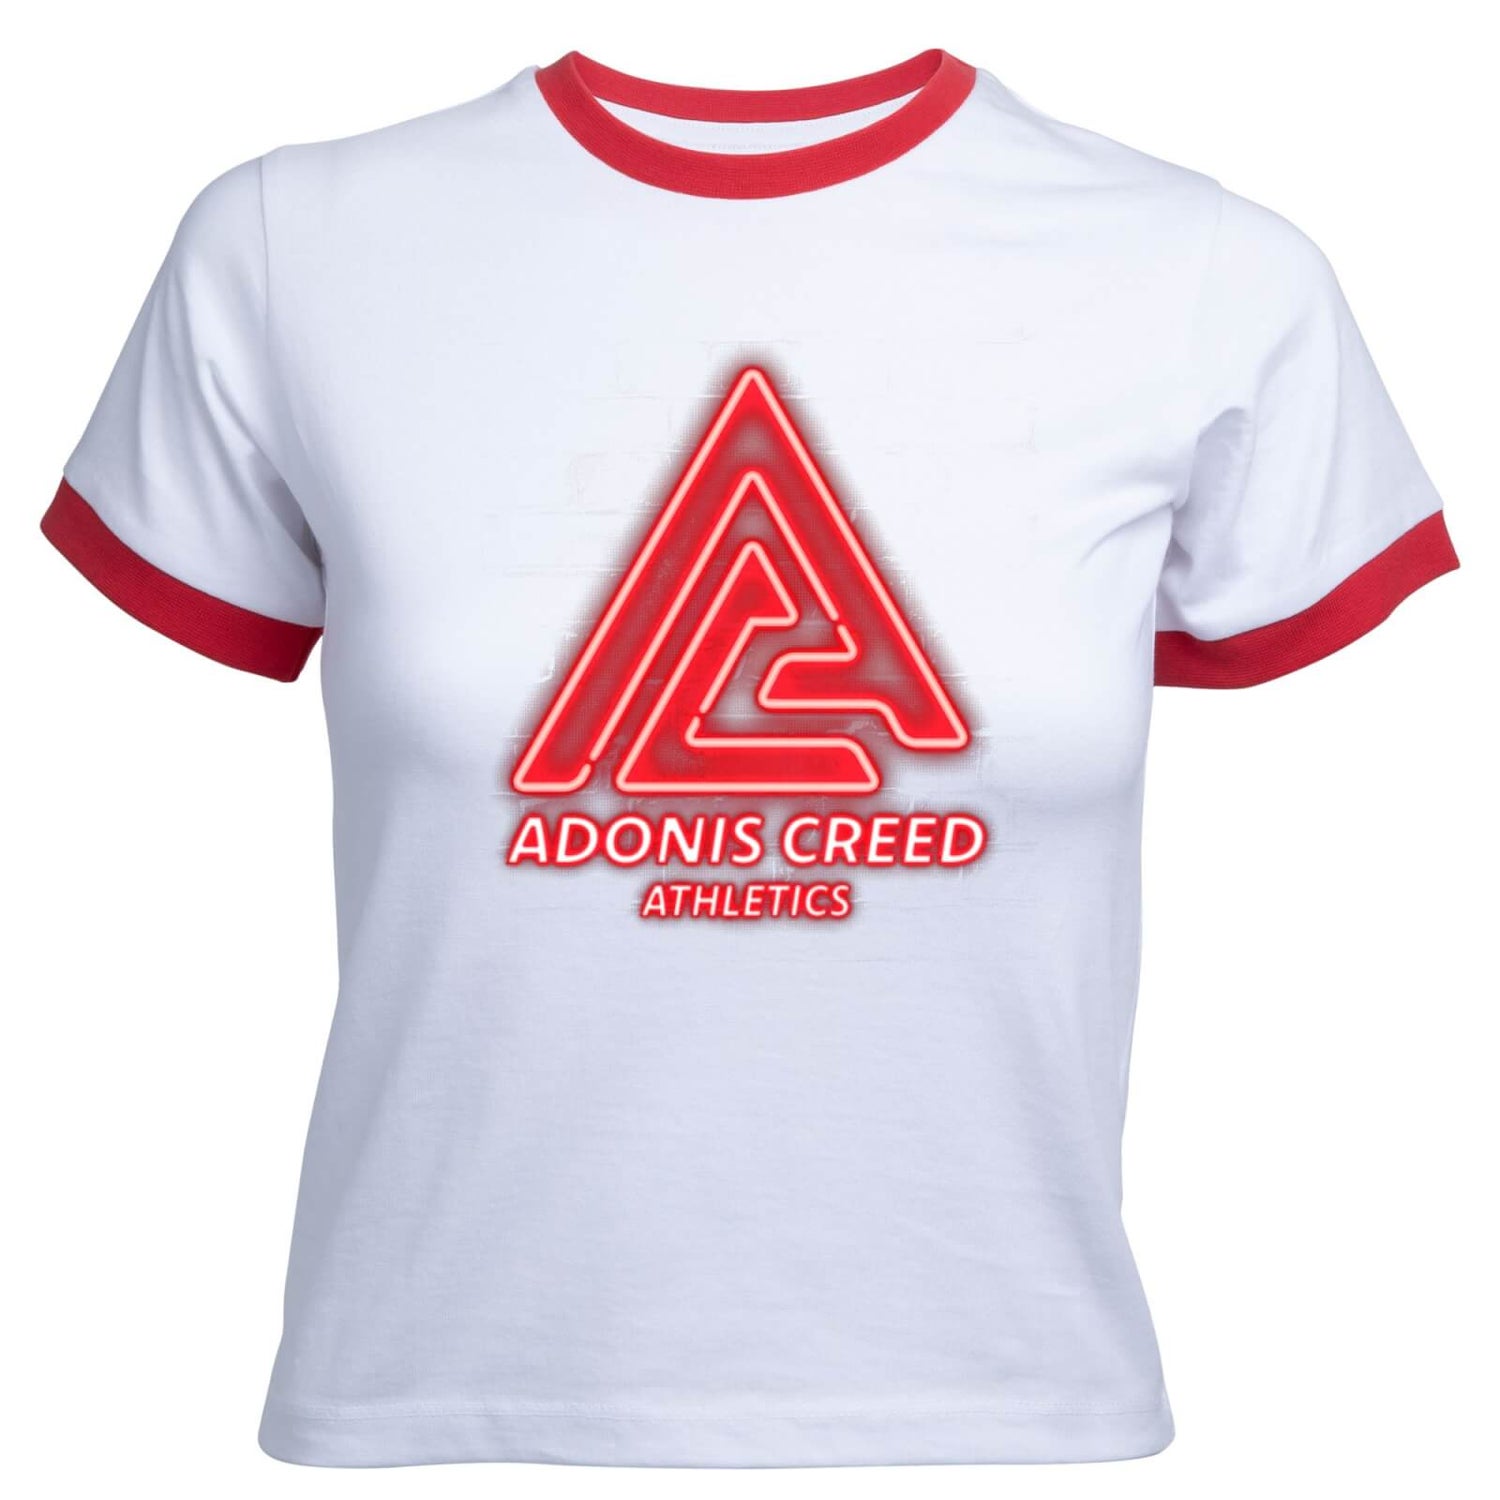 Creed Adonis Creed Athletics Neon Sign Women's Cropped Ringer T-Shirt - White Red - XS